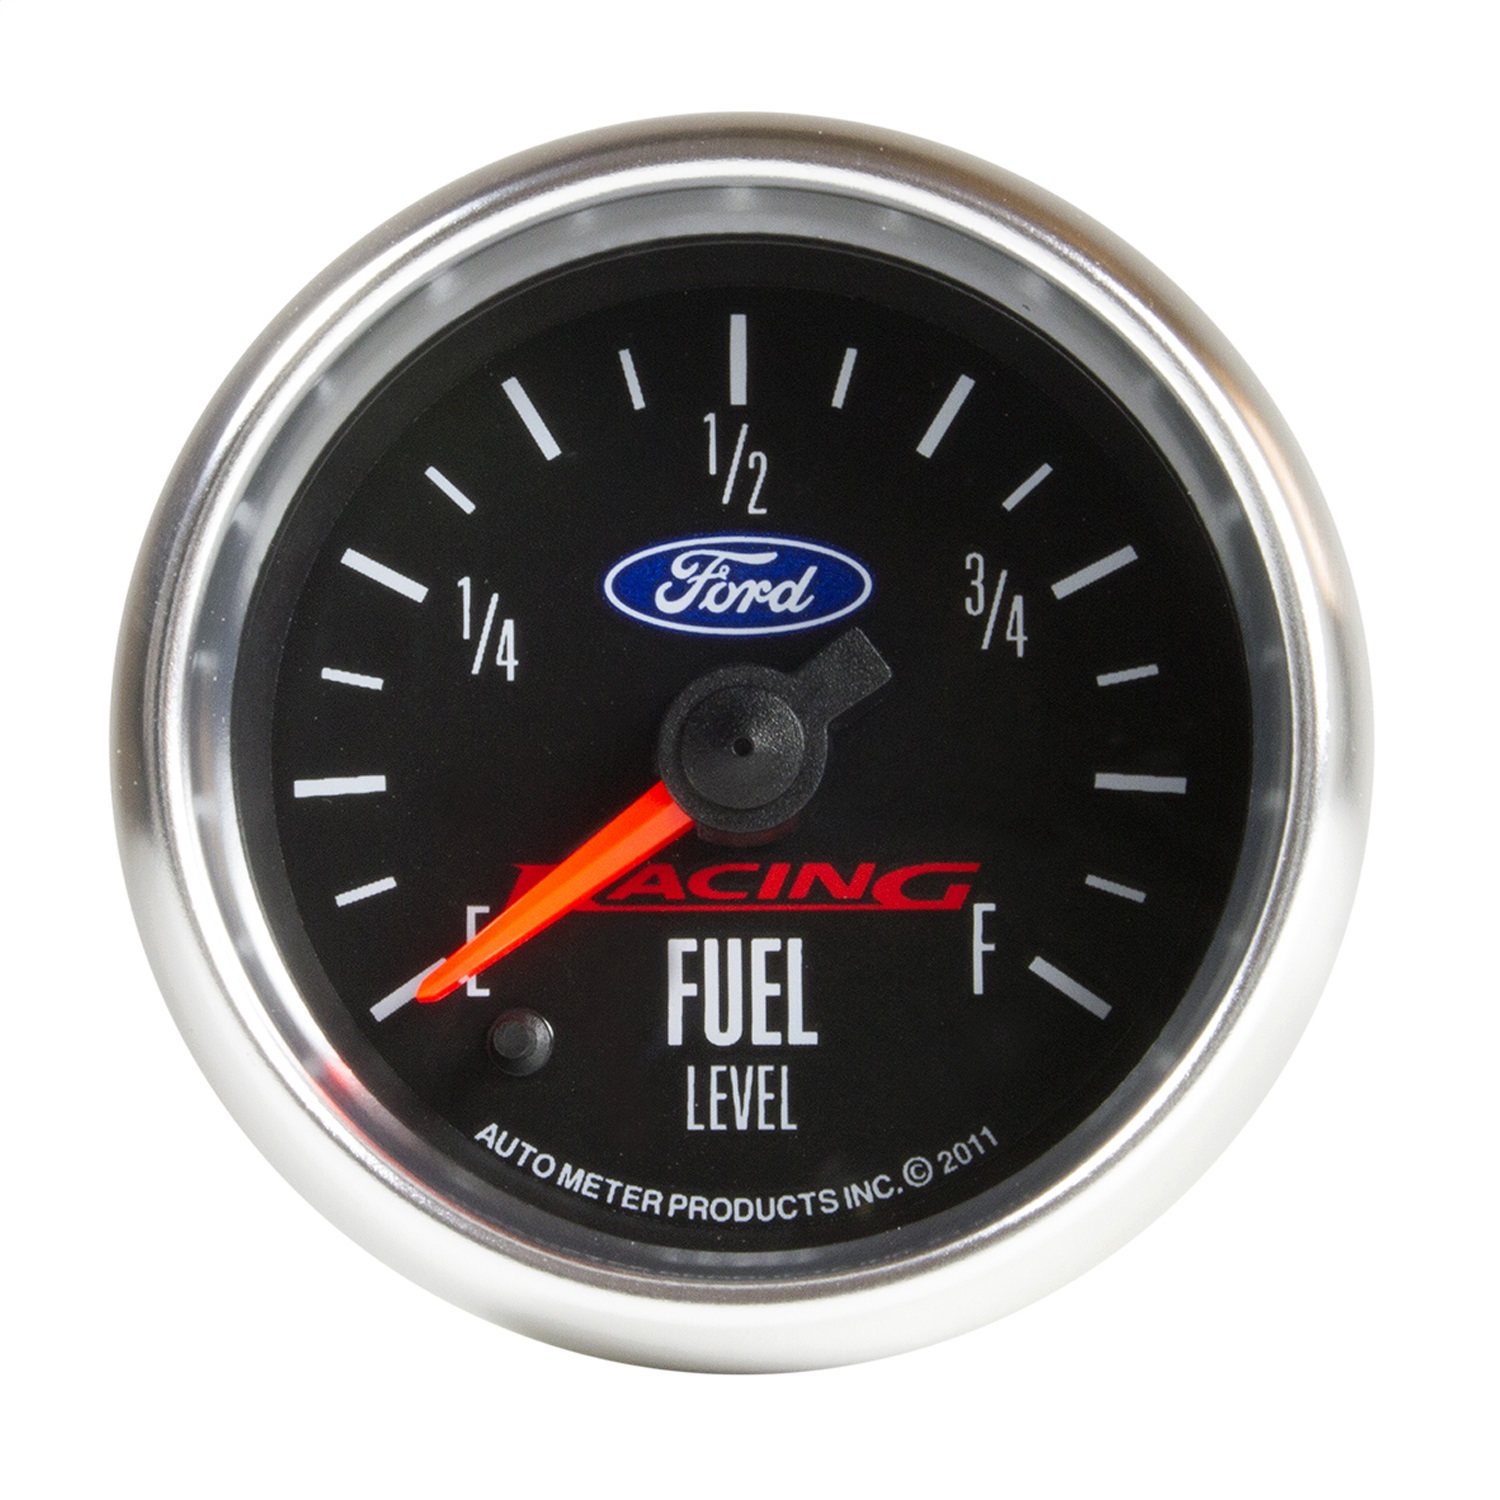 AutoMeter 880400 Ford Racing Electric Fuel Level Gauge